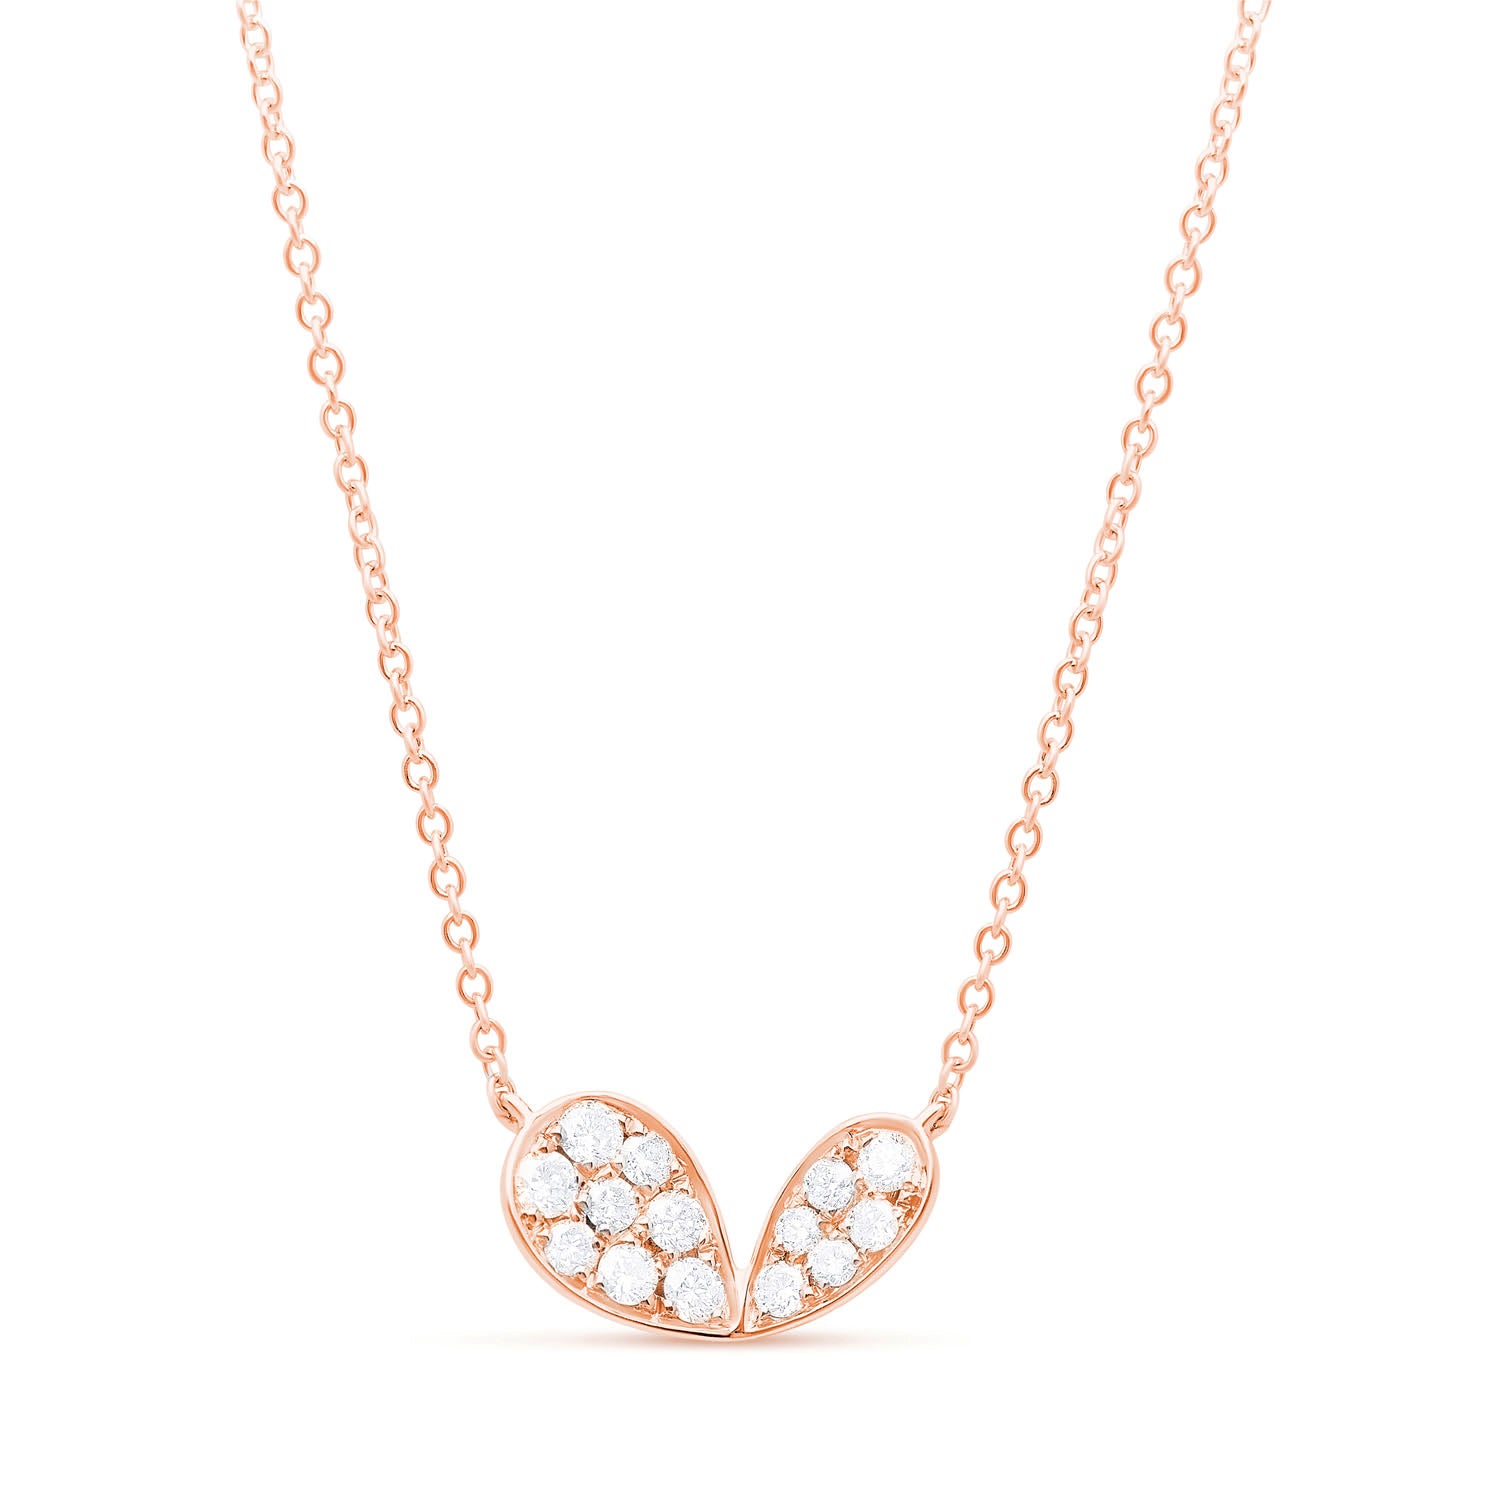 Whispers of Love Mini Necklace - Rose Gold